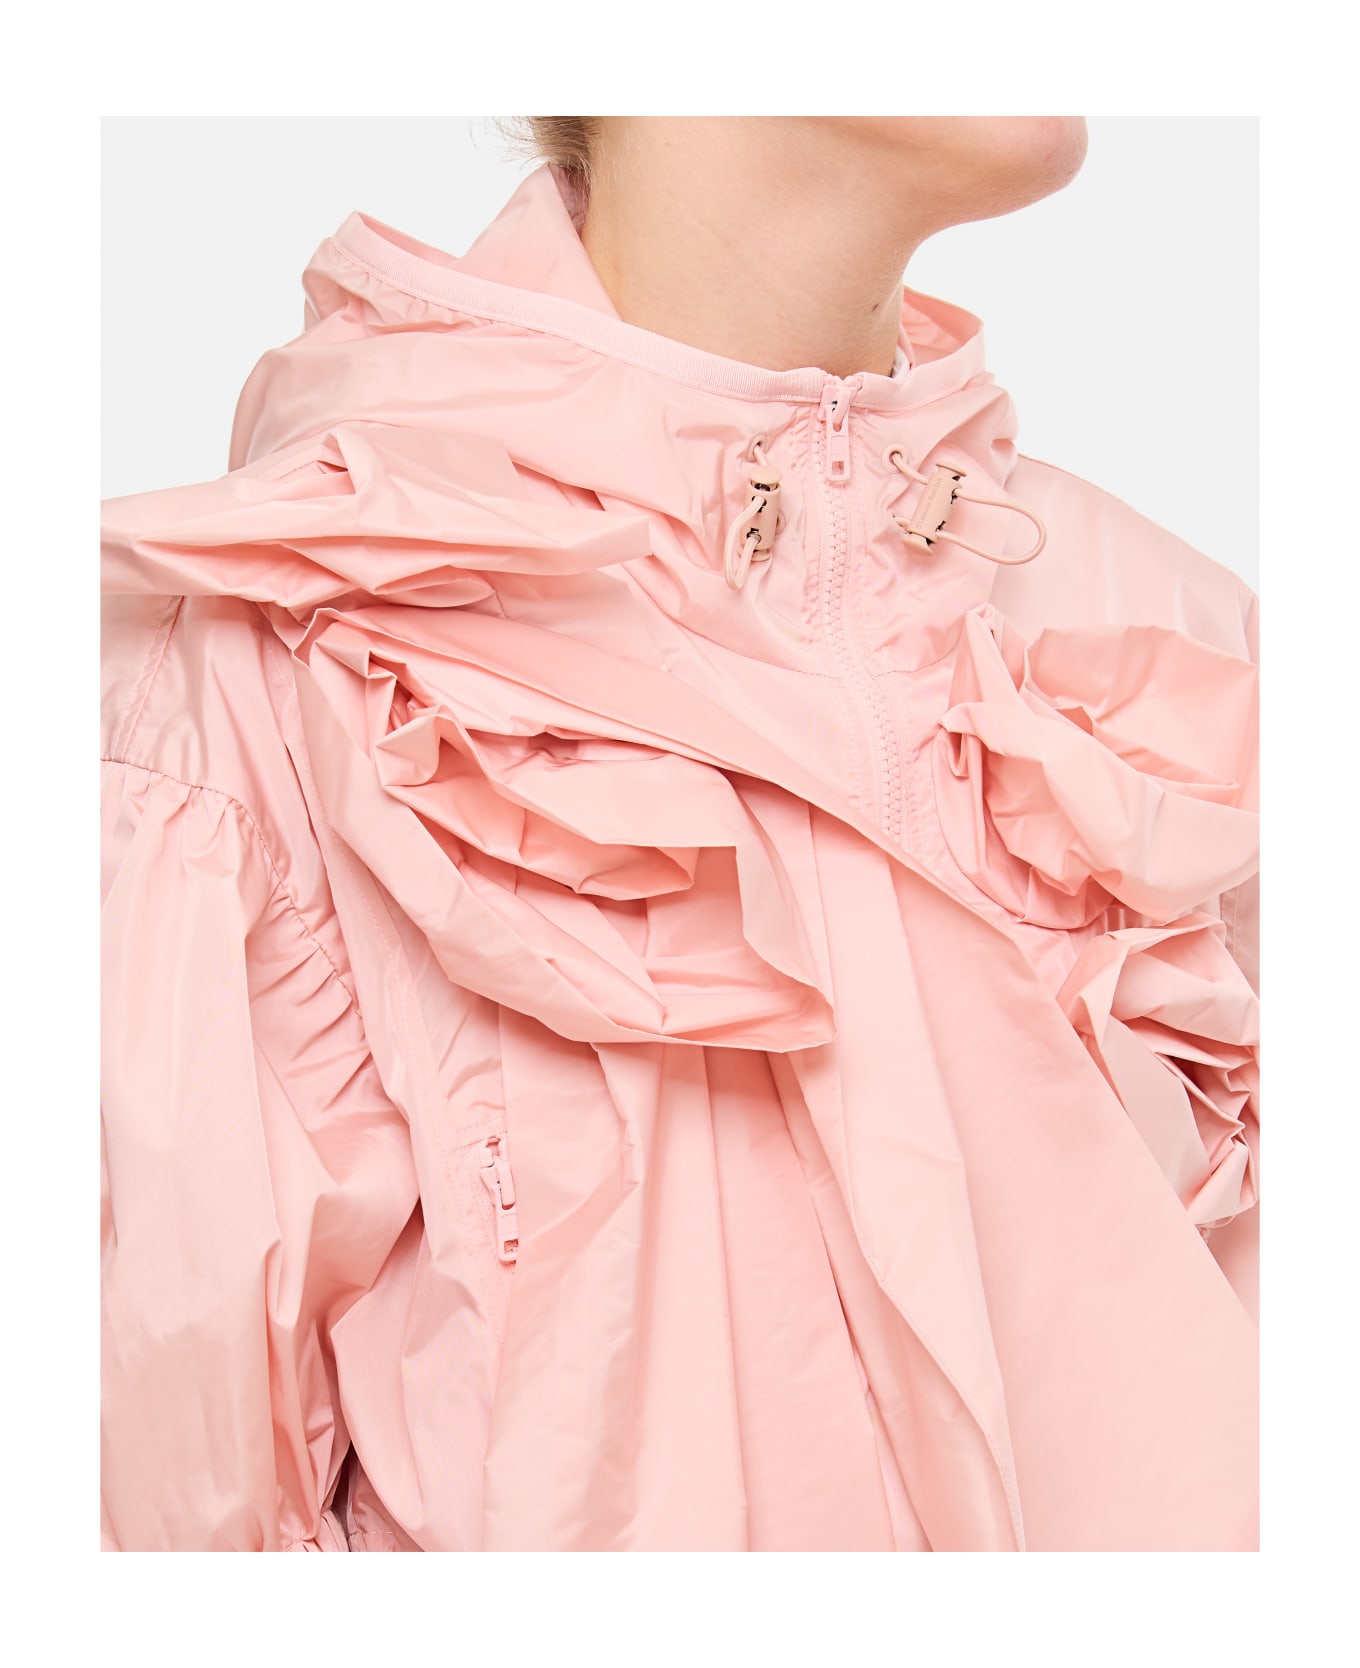 Simone Rocha Cropped Puff Sleeve Jacket W/ Turbo Pressed Roses - PINK